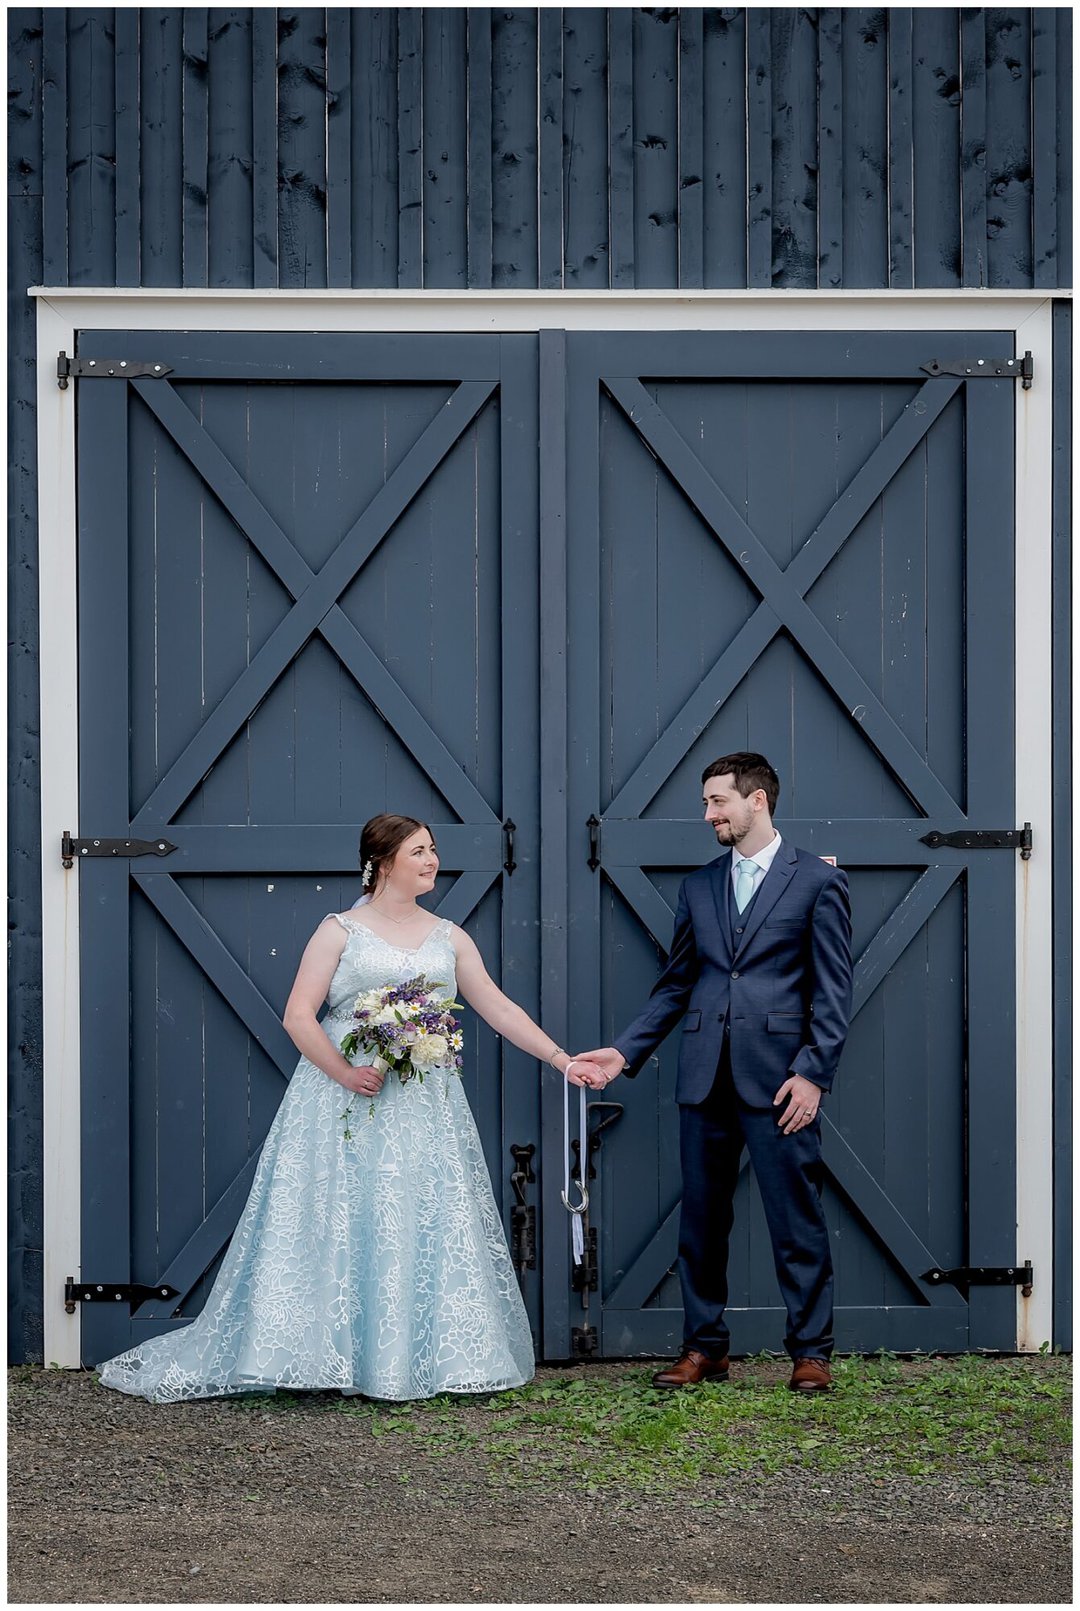 The bride and groom pose in front of a rustic barn style garage during their wedding photos at the Founders House in Annapolis Royal NS.